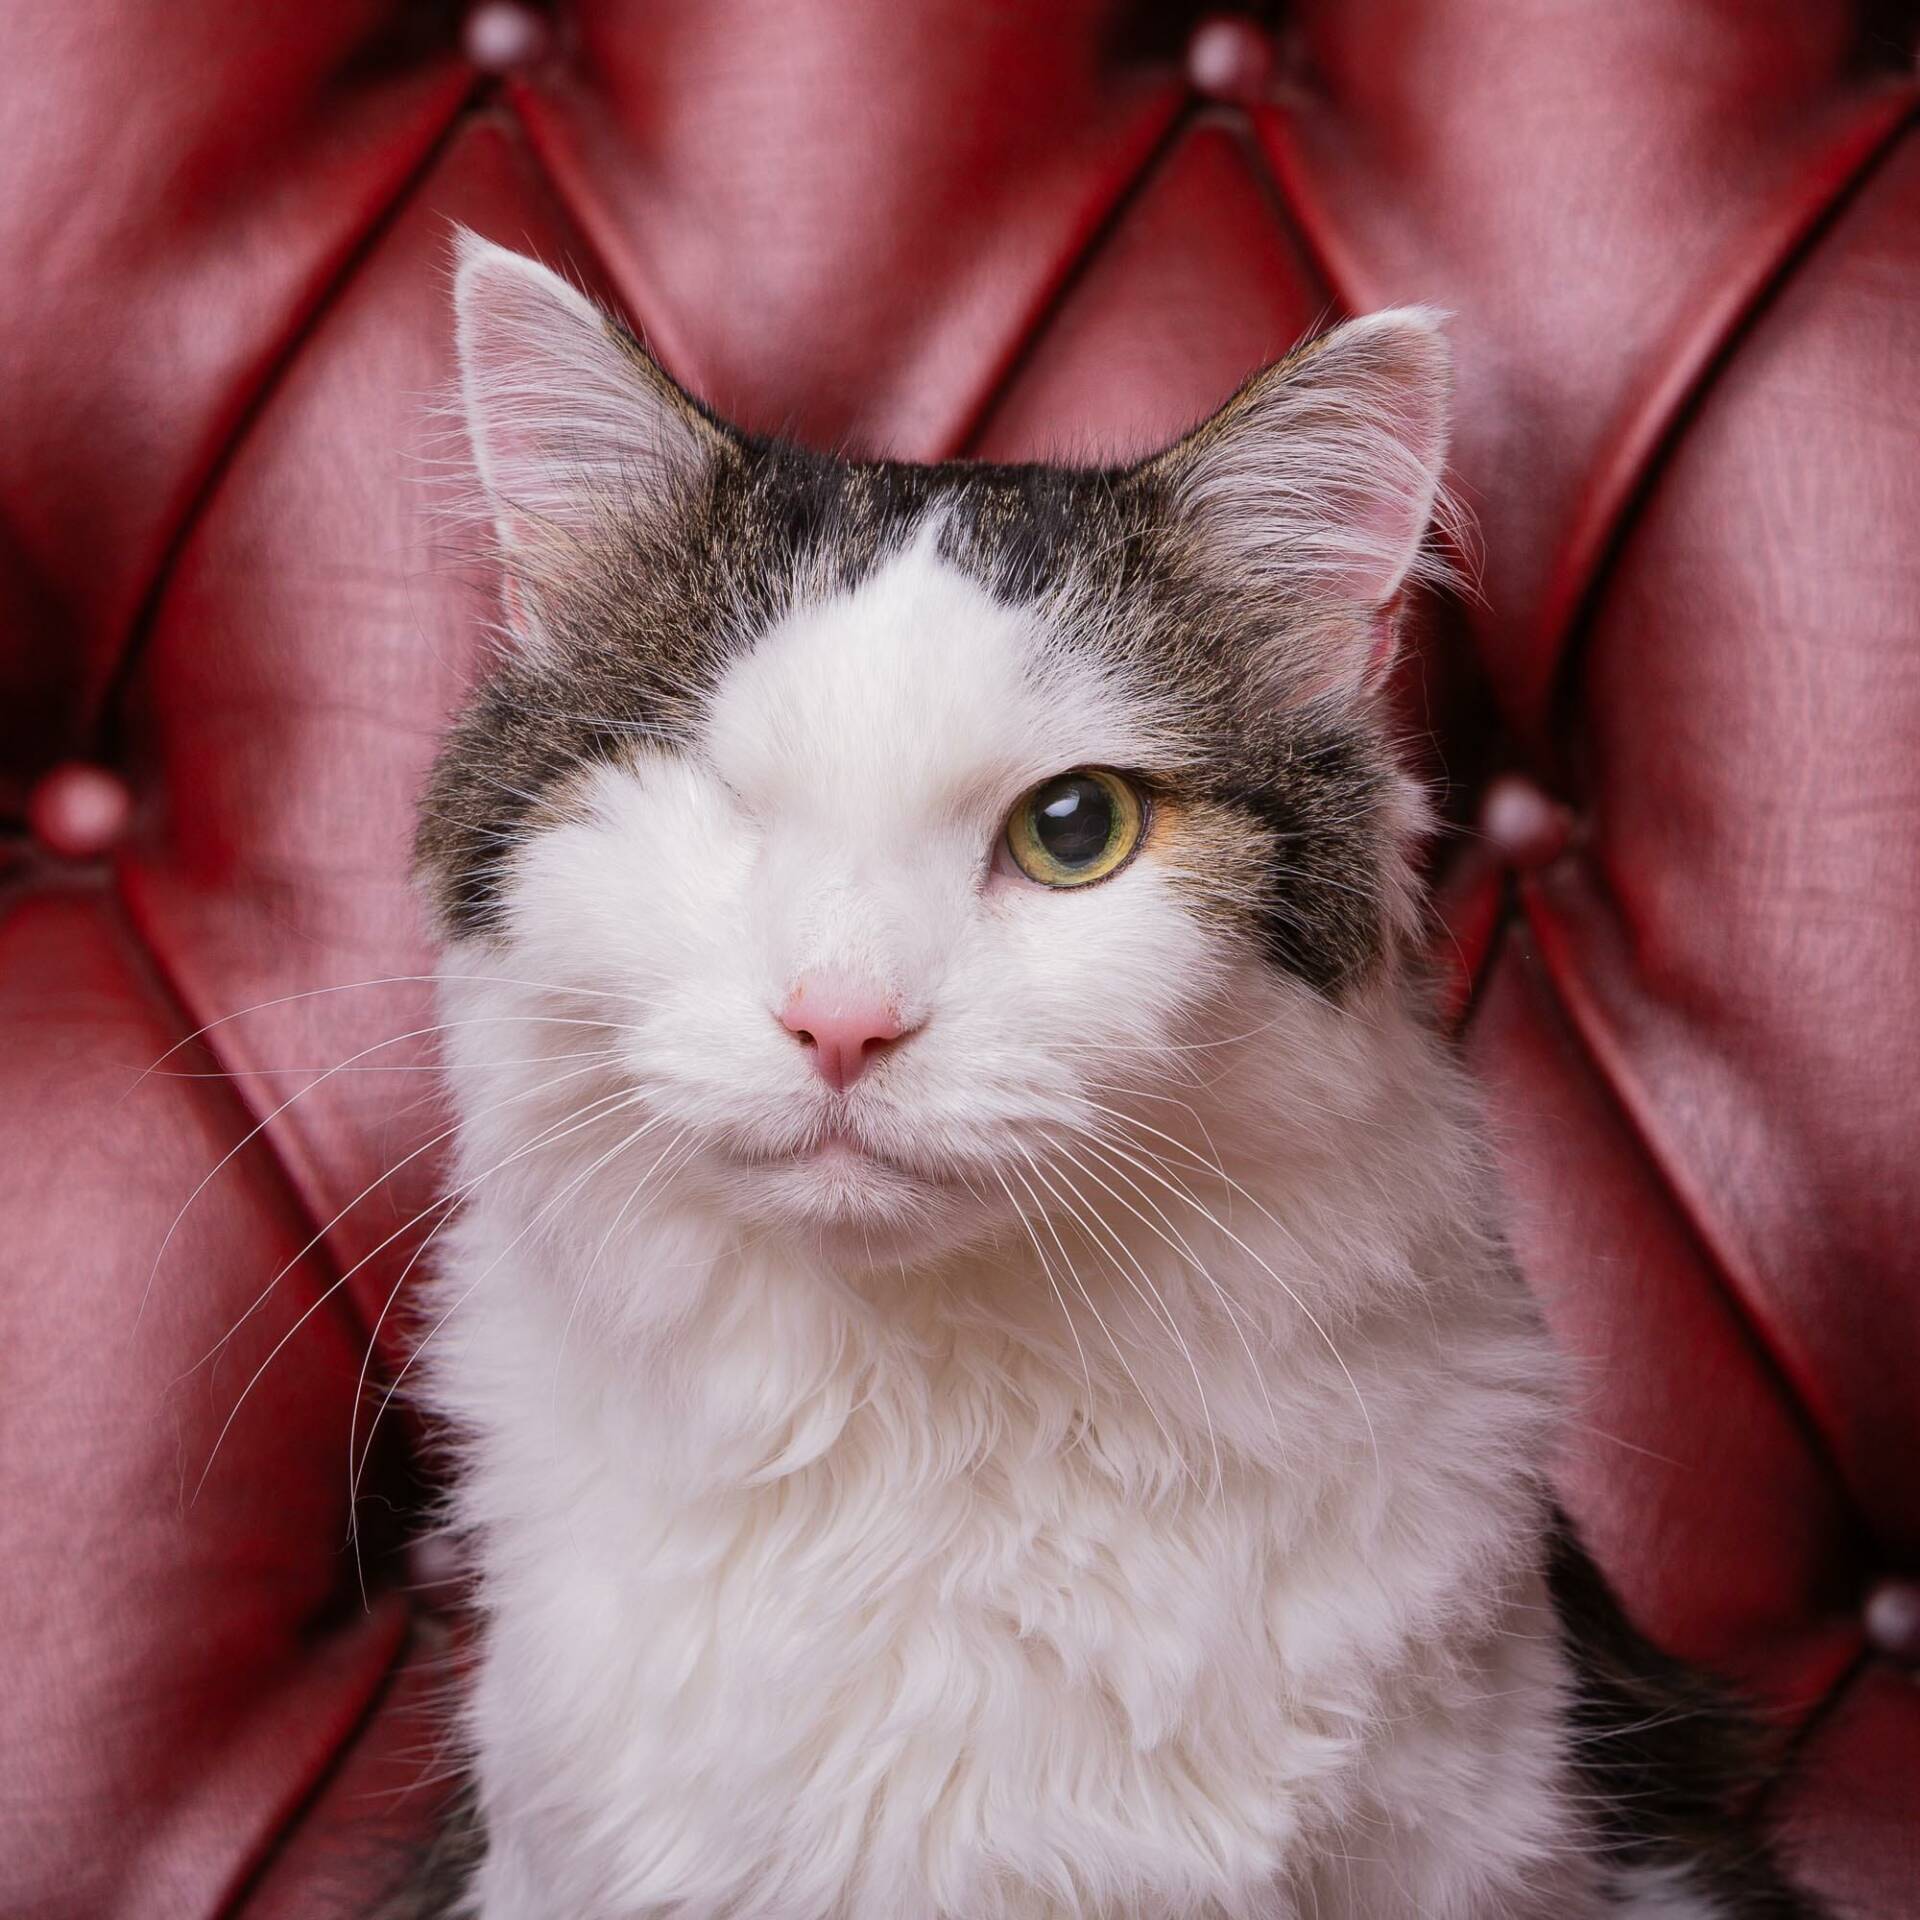 Cat Portraits - Photography by Mark Hewitson Photography of Thame, Oxfordshire